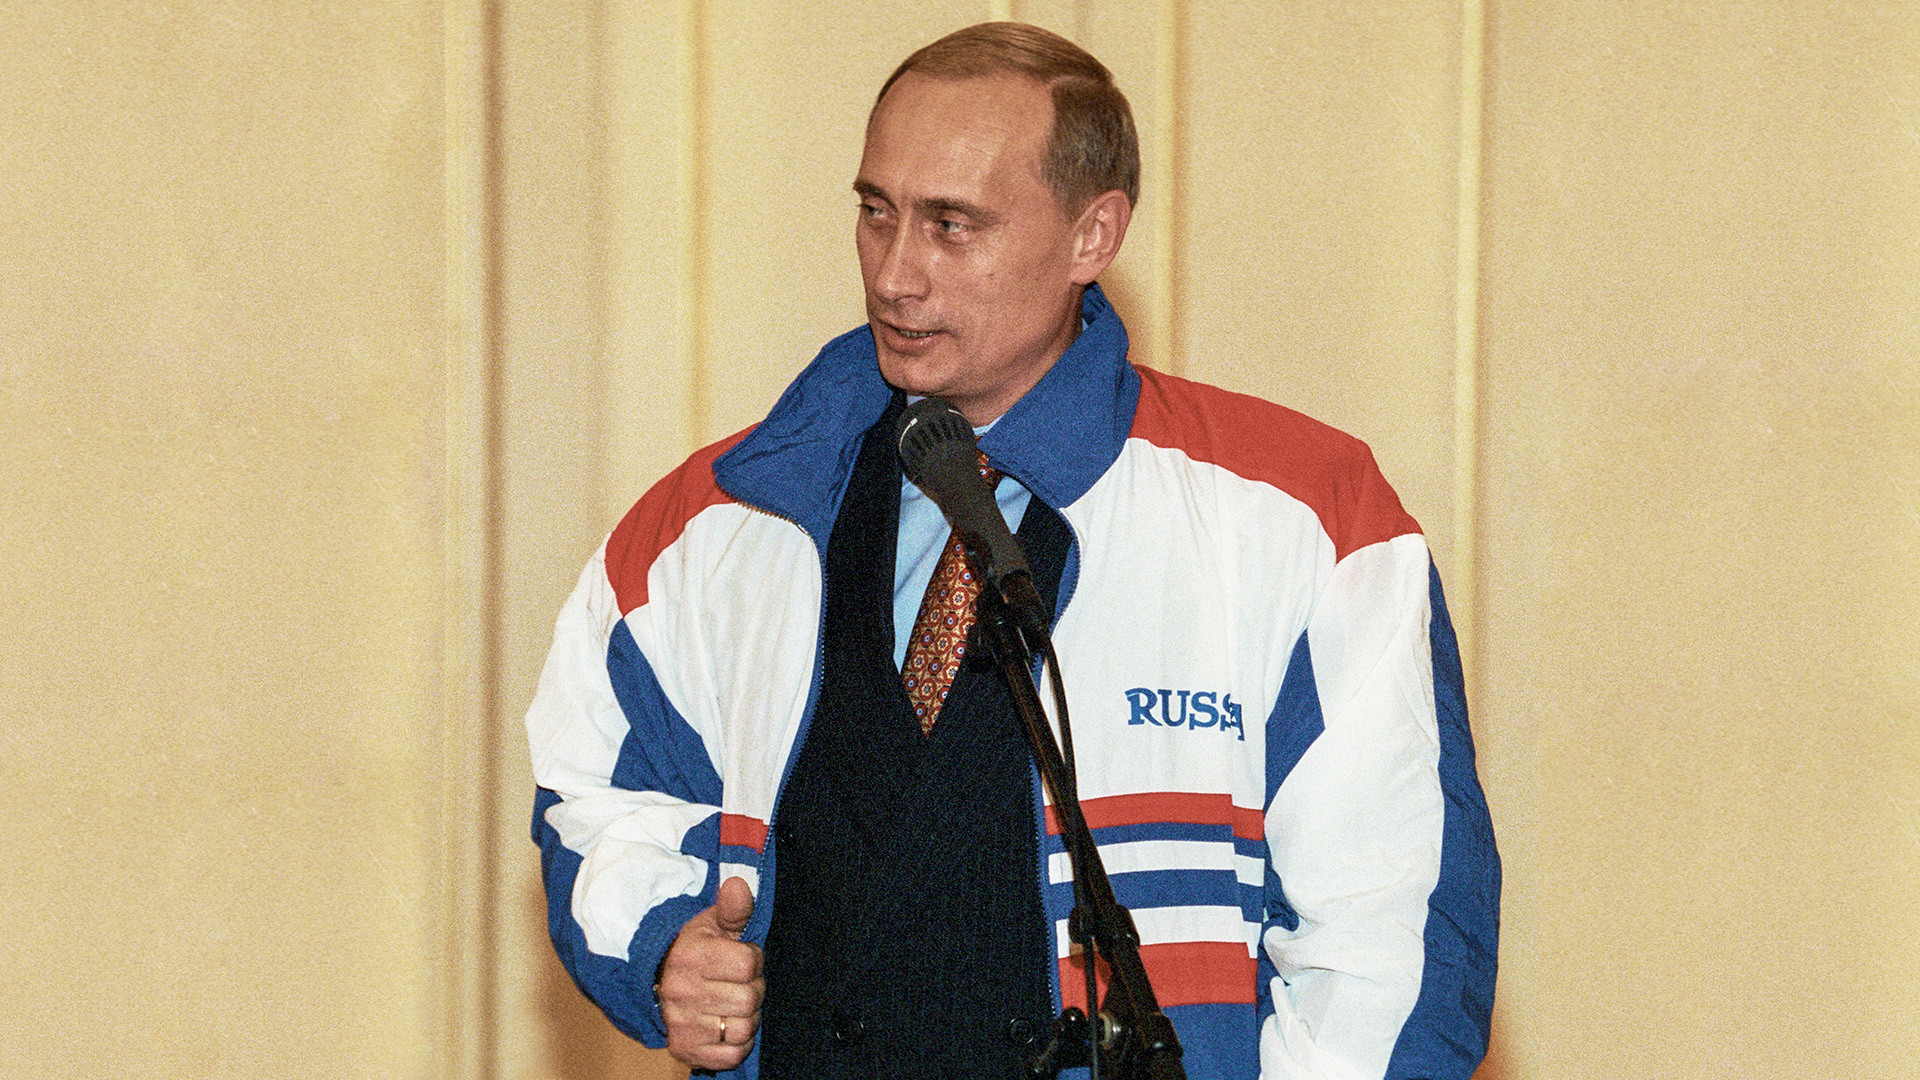 Russian Prime Minister Vladimir Putin speaks to athletes in front of the athletics team.